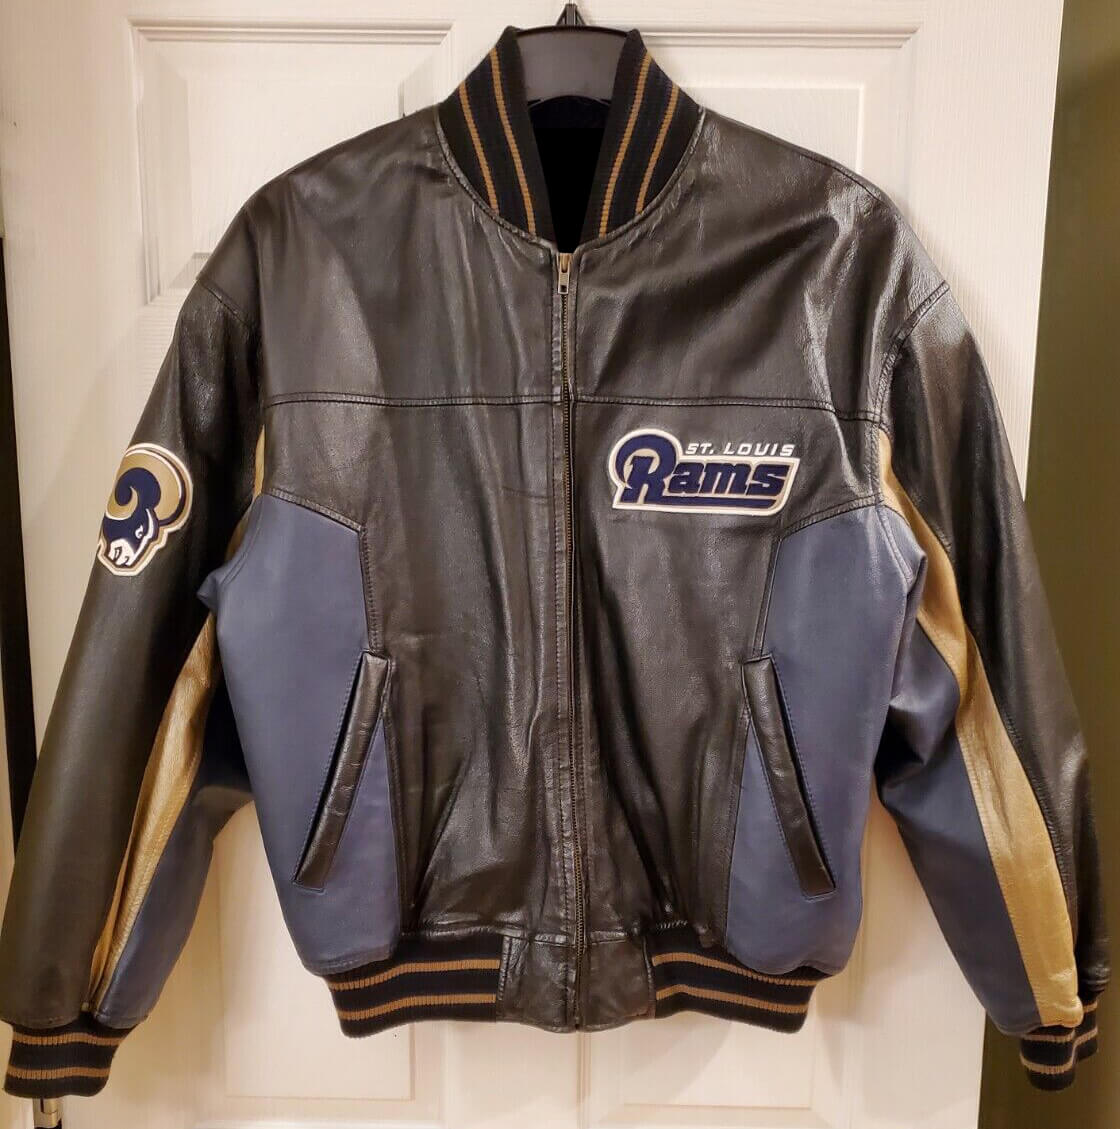 ST. LOUIS RAMS MEN'S LEATHER JACKET (XL-Never worn) - clothing